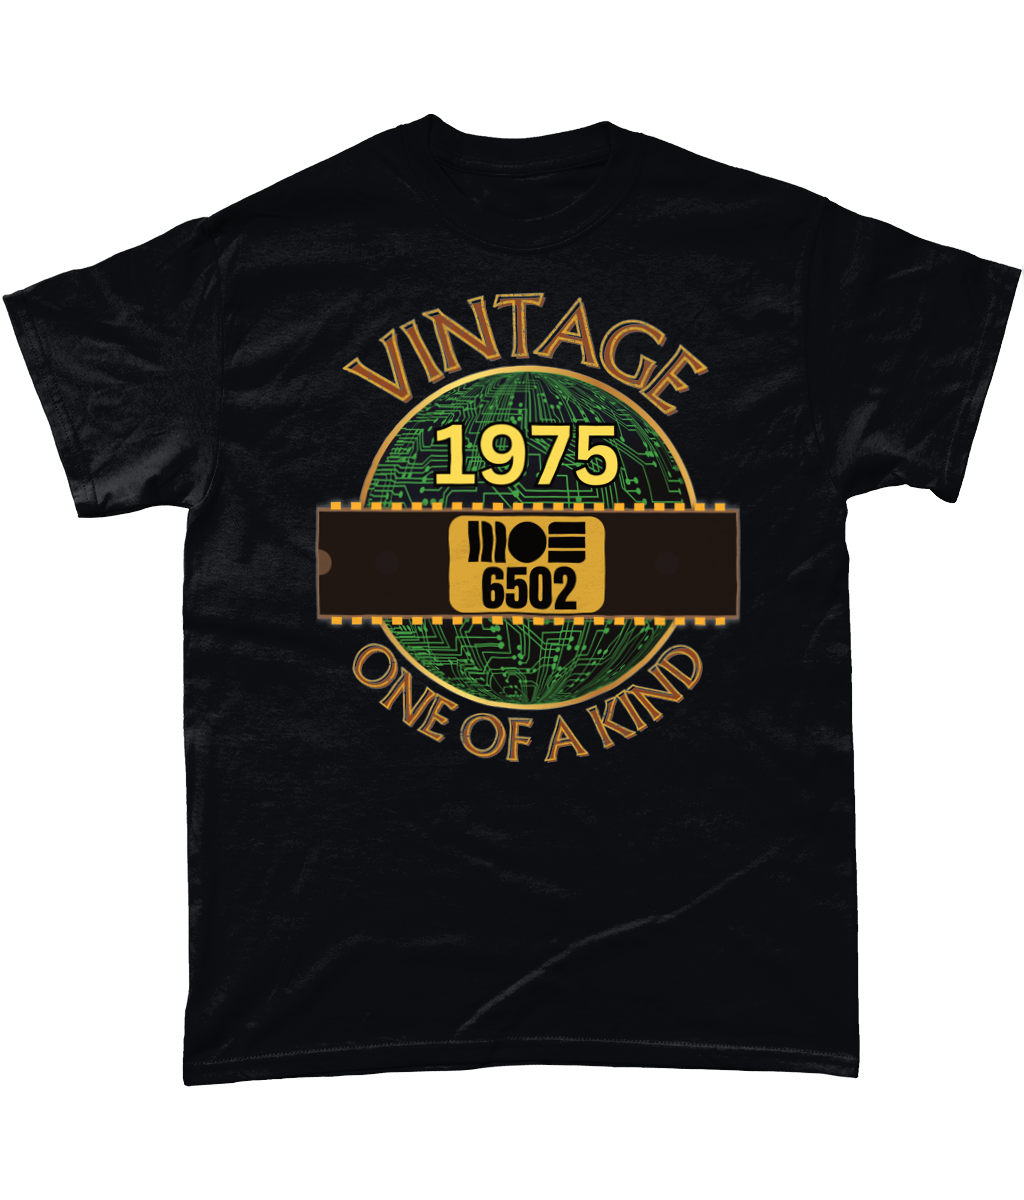 Black T-shirt with a gold circle with a basic representation of a circuit board in green and a 40 pin chip across the front with MOS 6502 and 1975 written on it. Vintage one of a kind around the circle